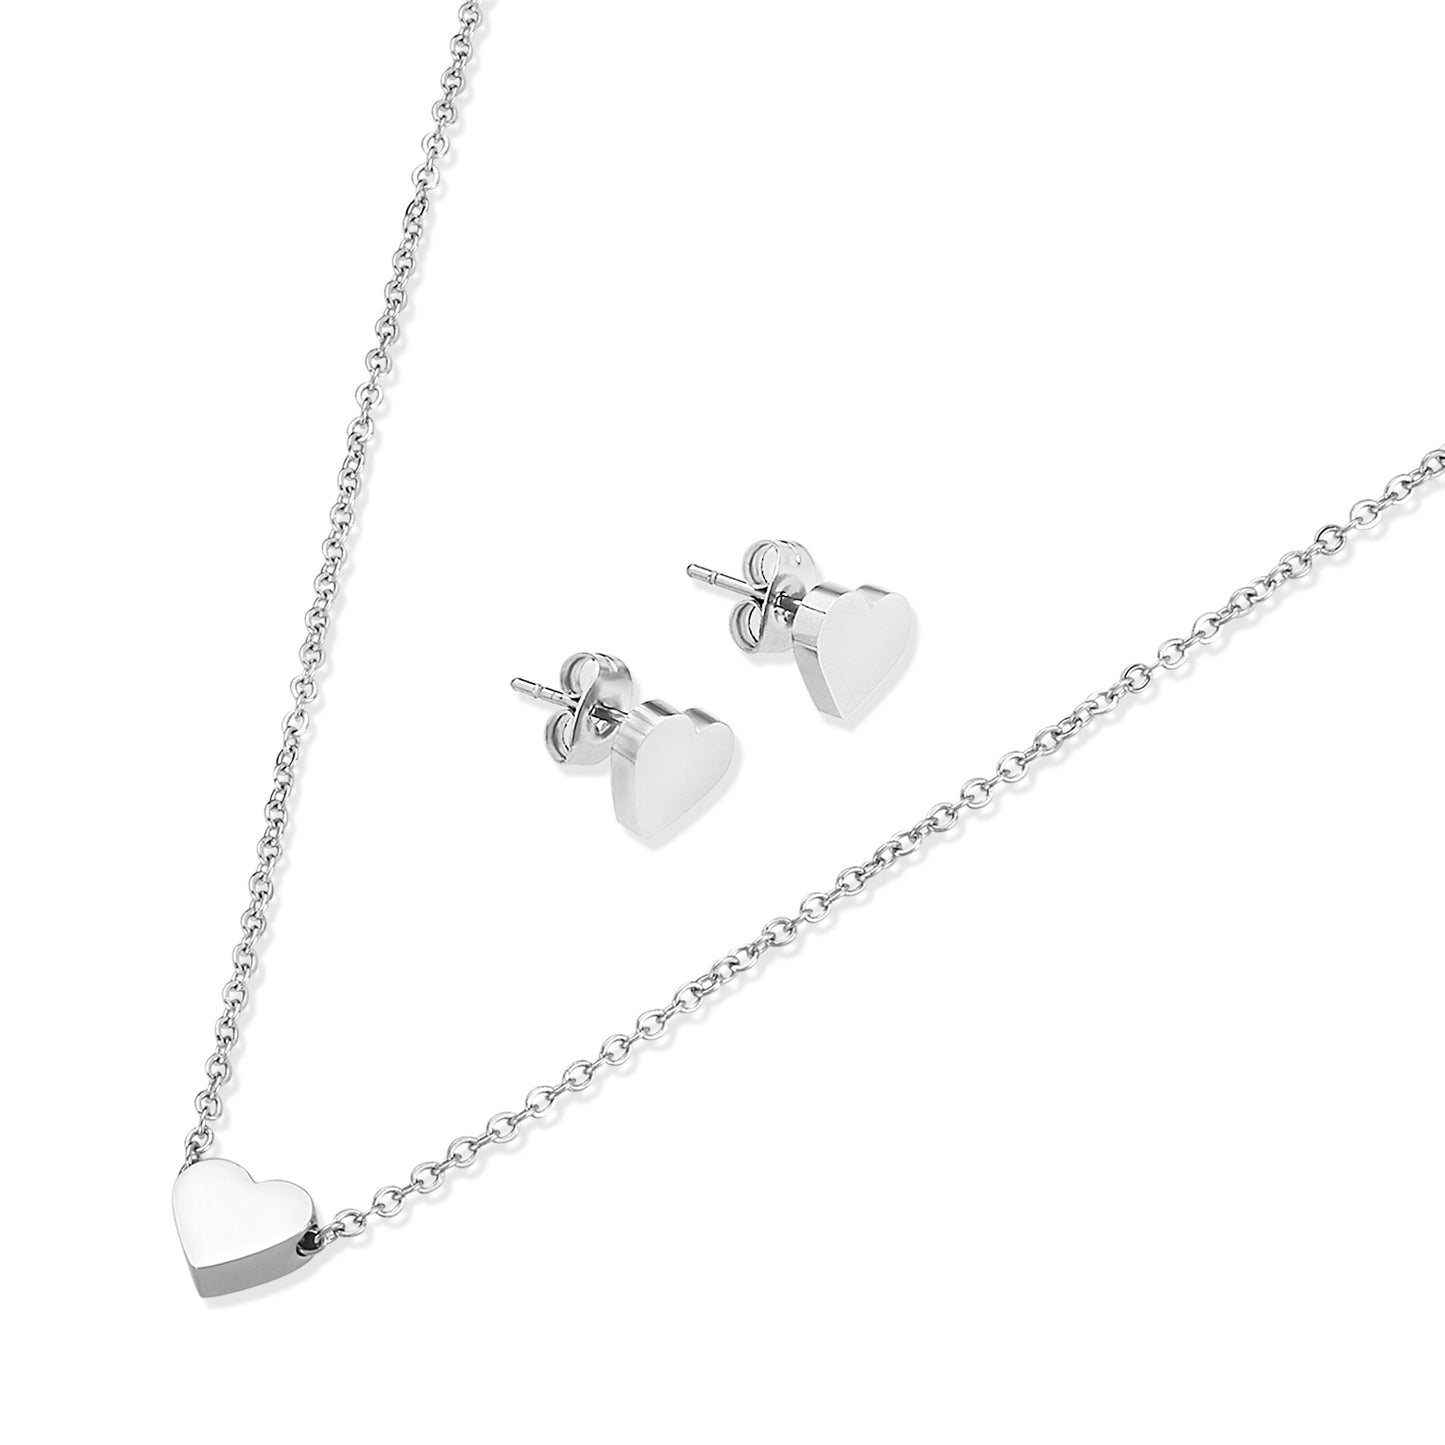 ELYA Heart Shaped Necklace and Earrings Jewelry Set